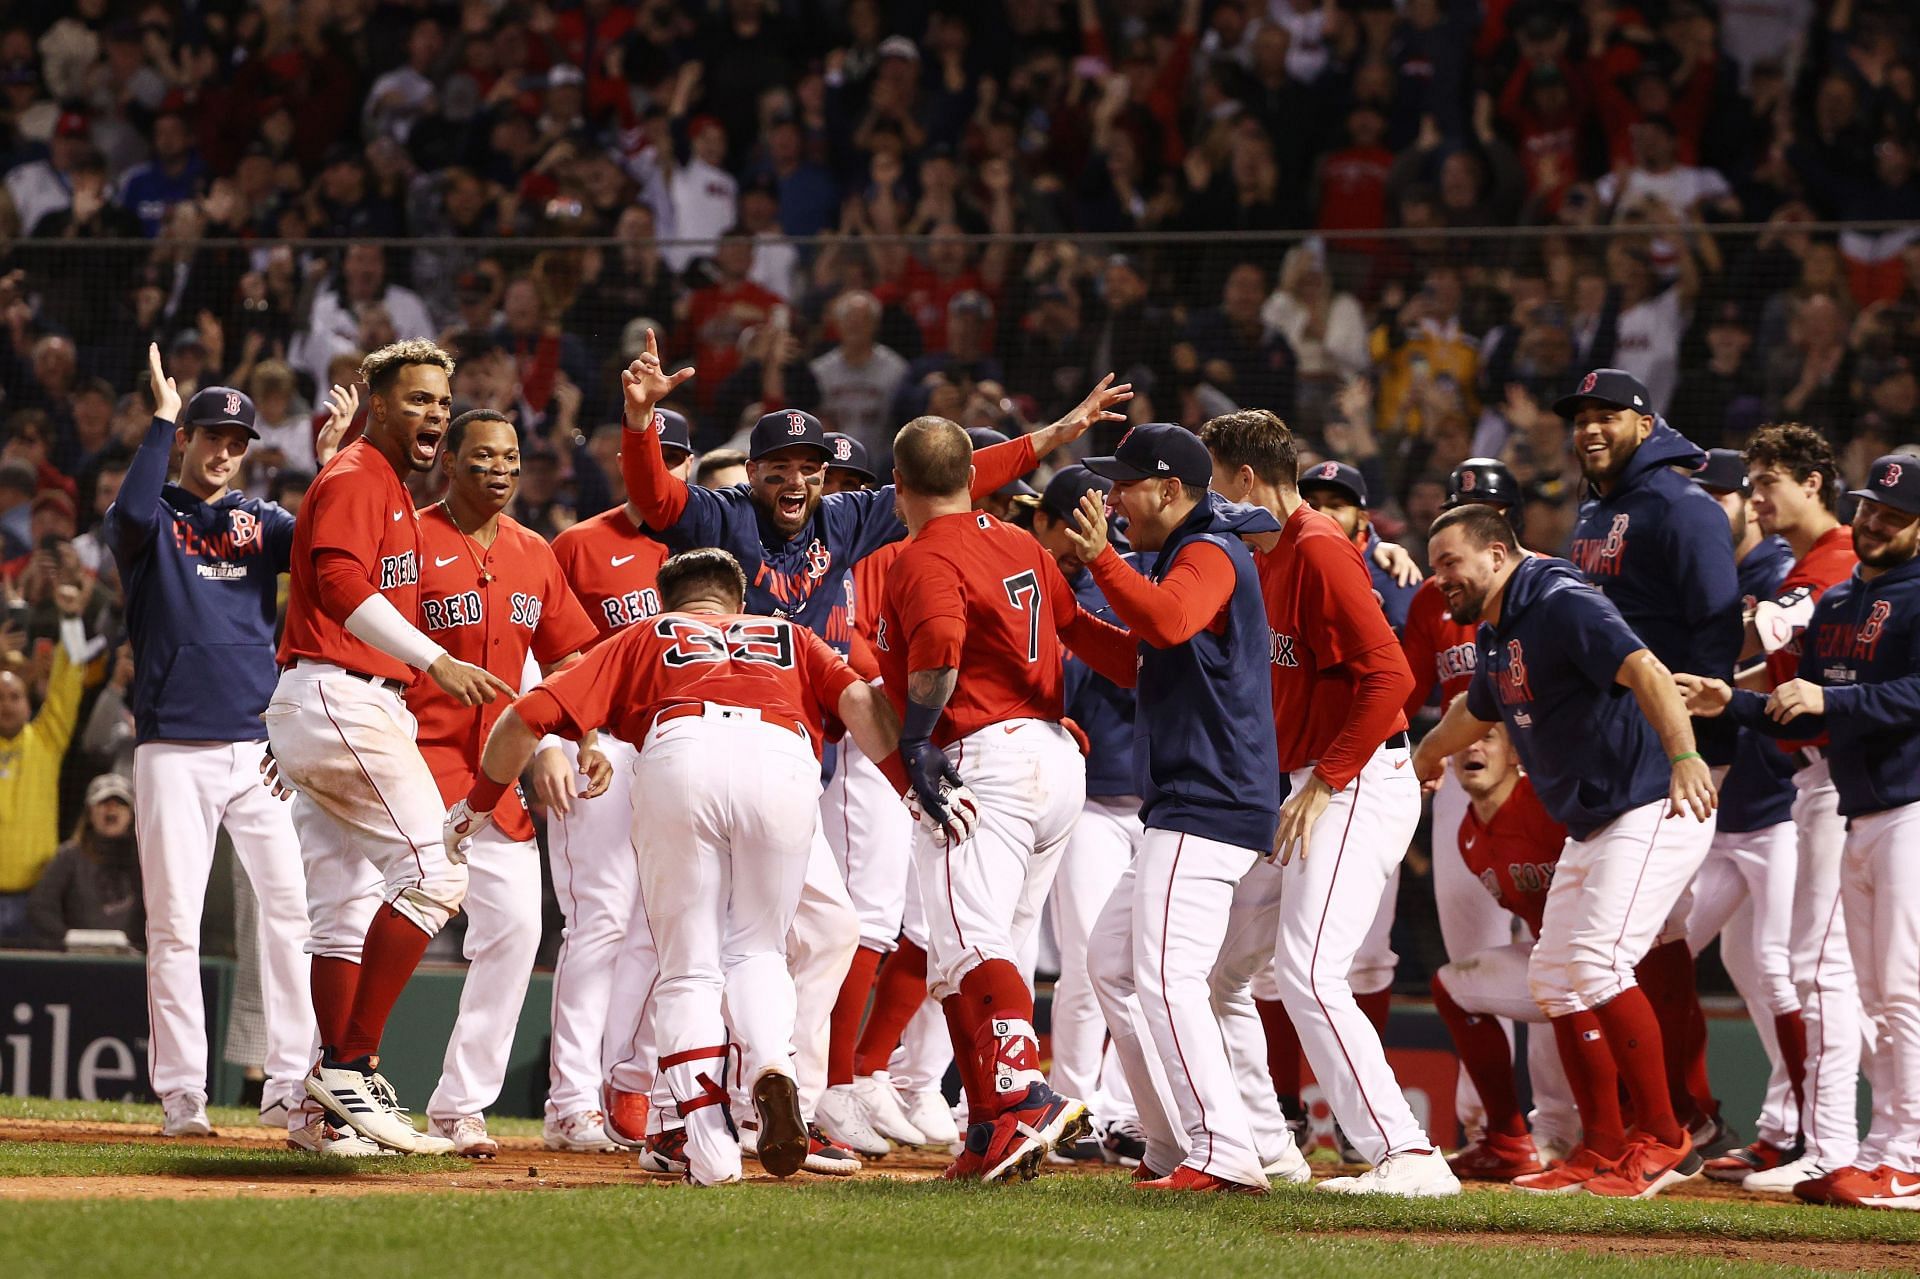 MLB on X: Flex those muscles, Boston! The @RedSox complete the 3